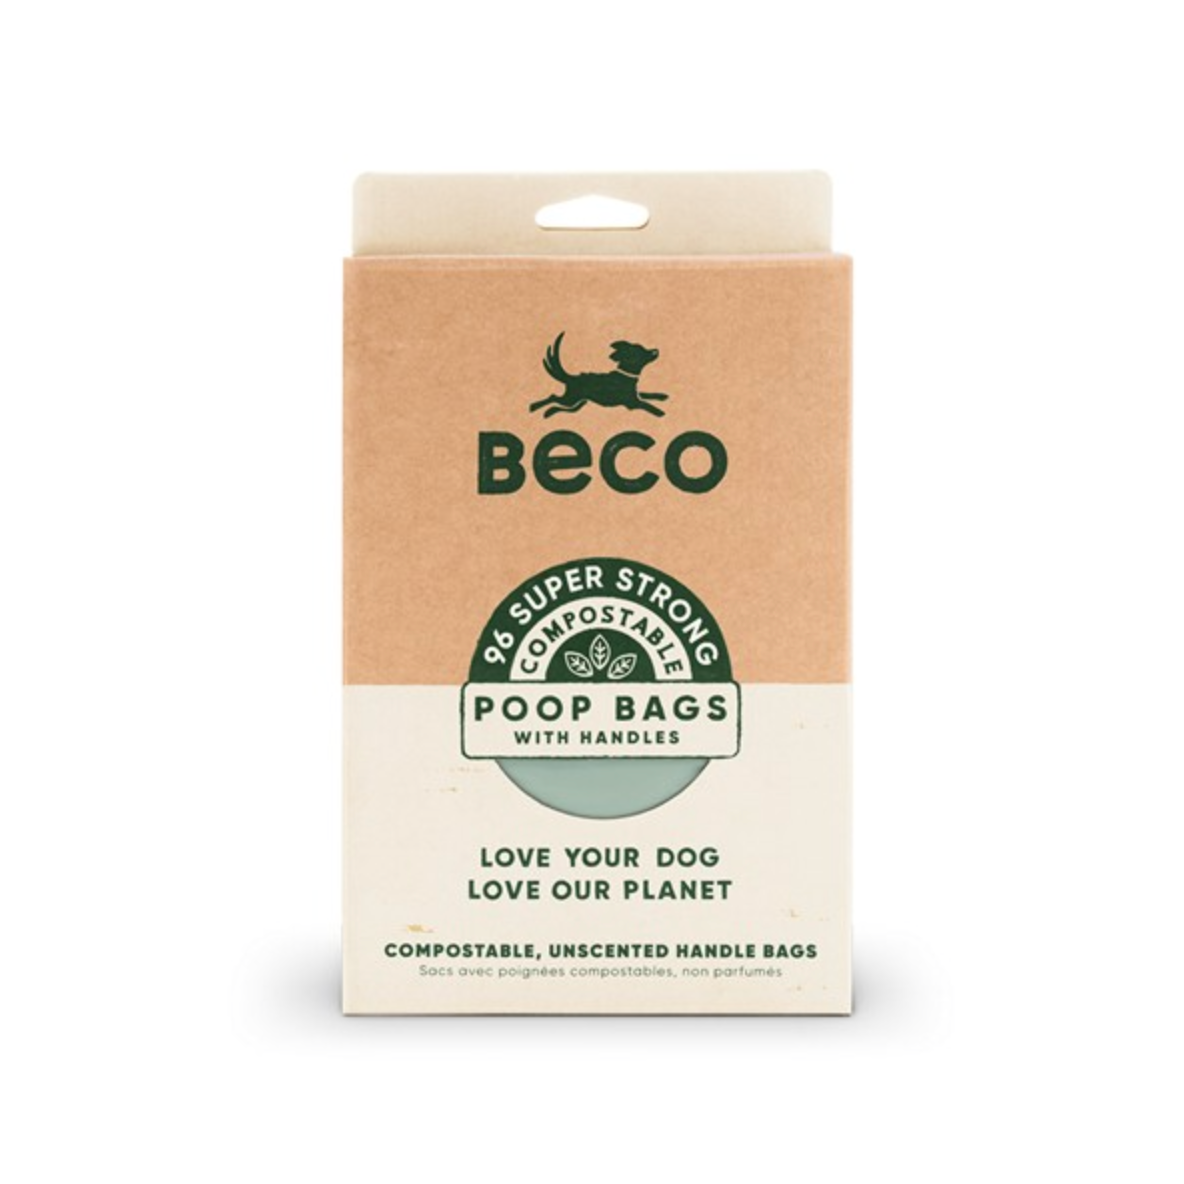 Beco Unscented Compostable Poop Bags with Handles (96 Pack)